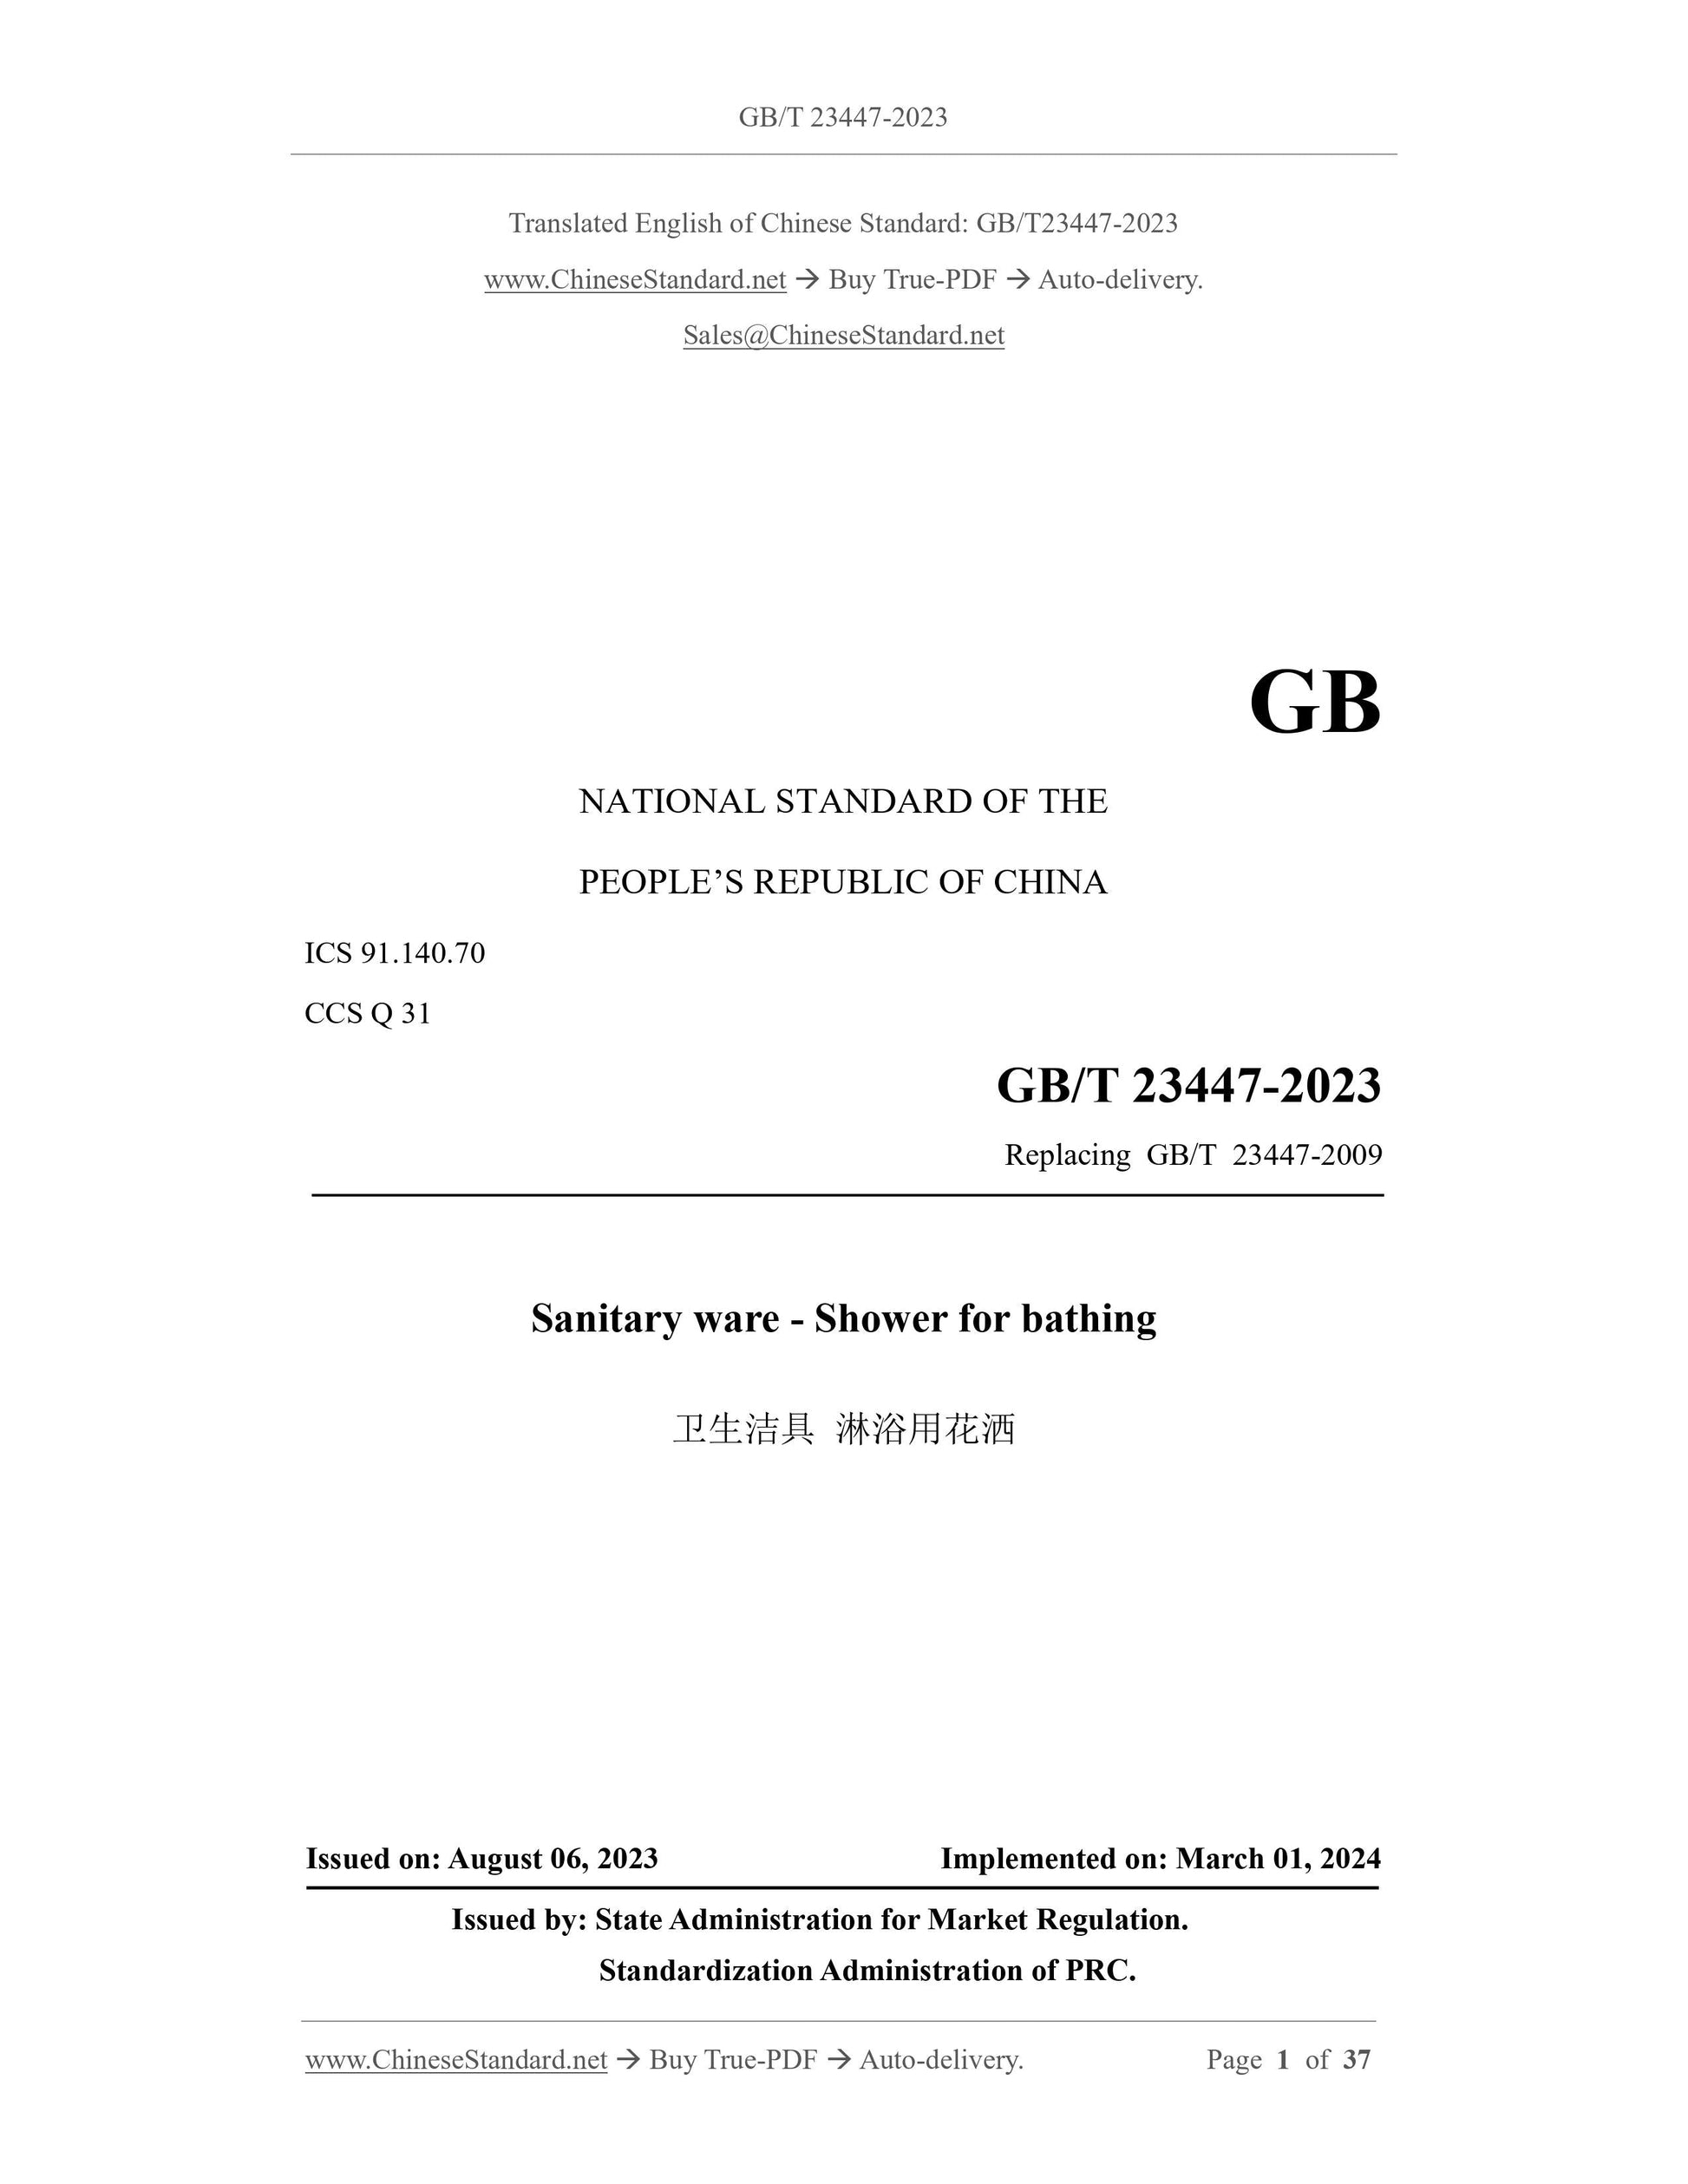 GB/T 23447-2023 Page 1